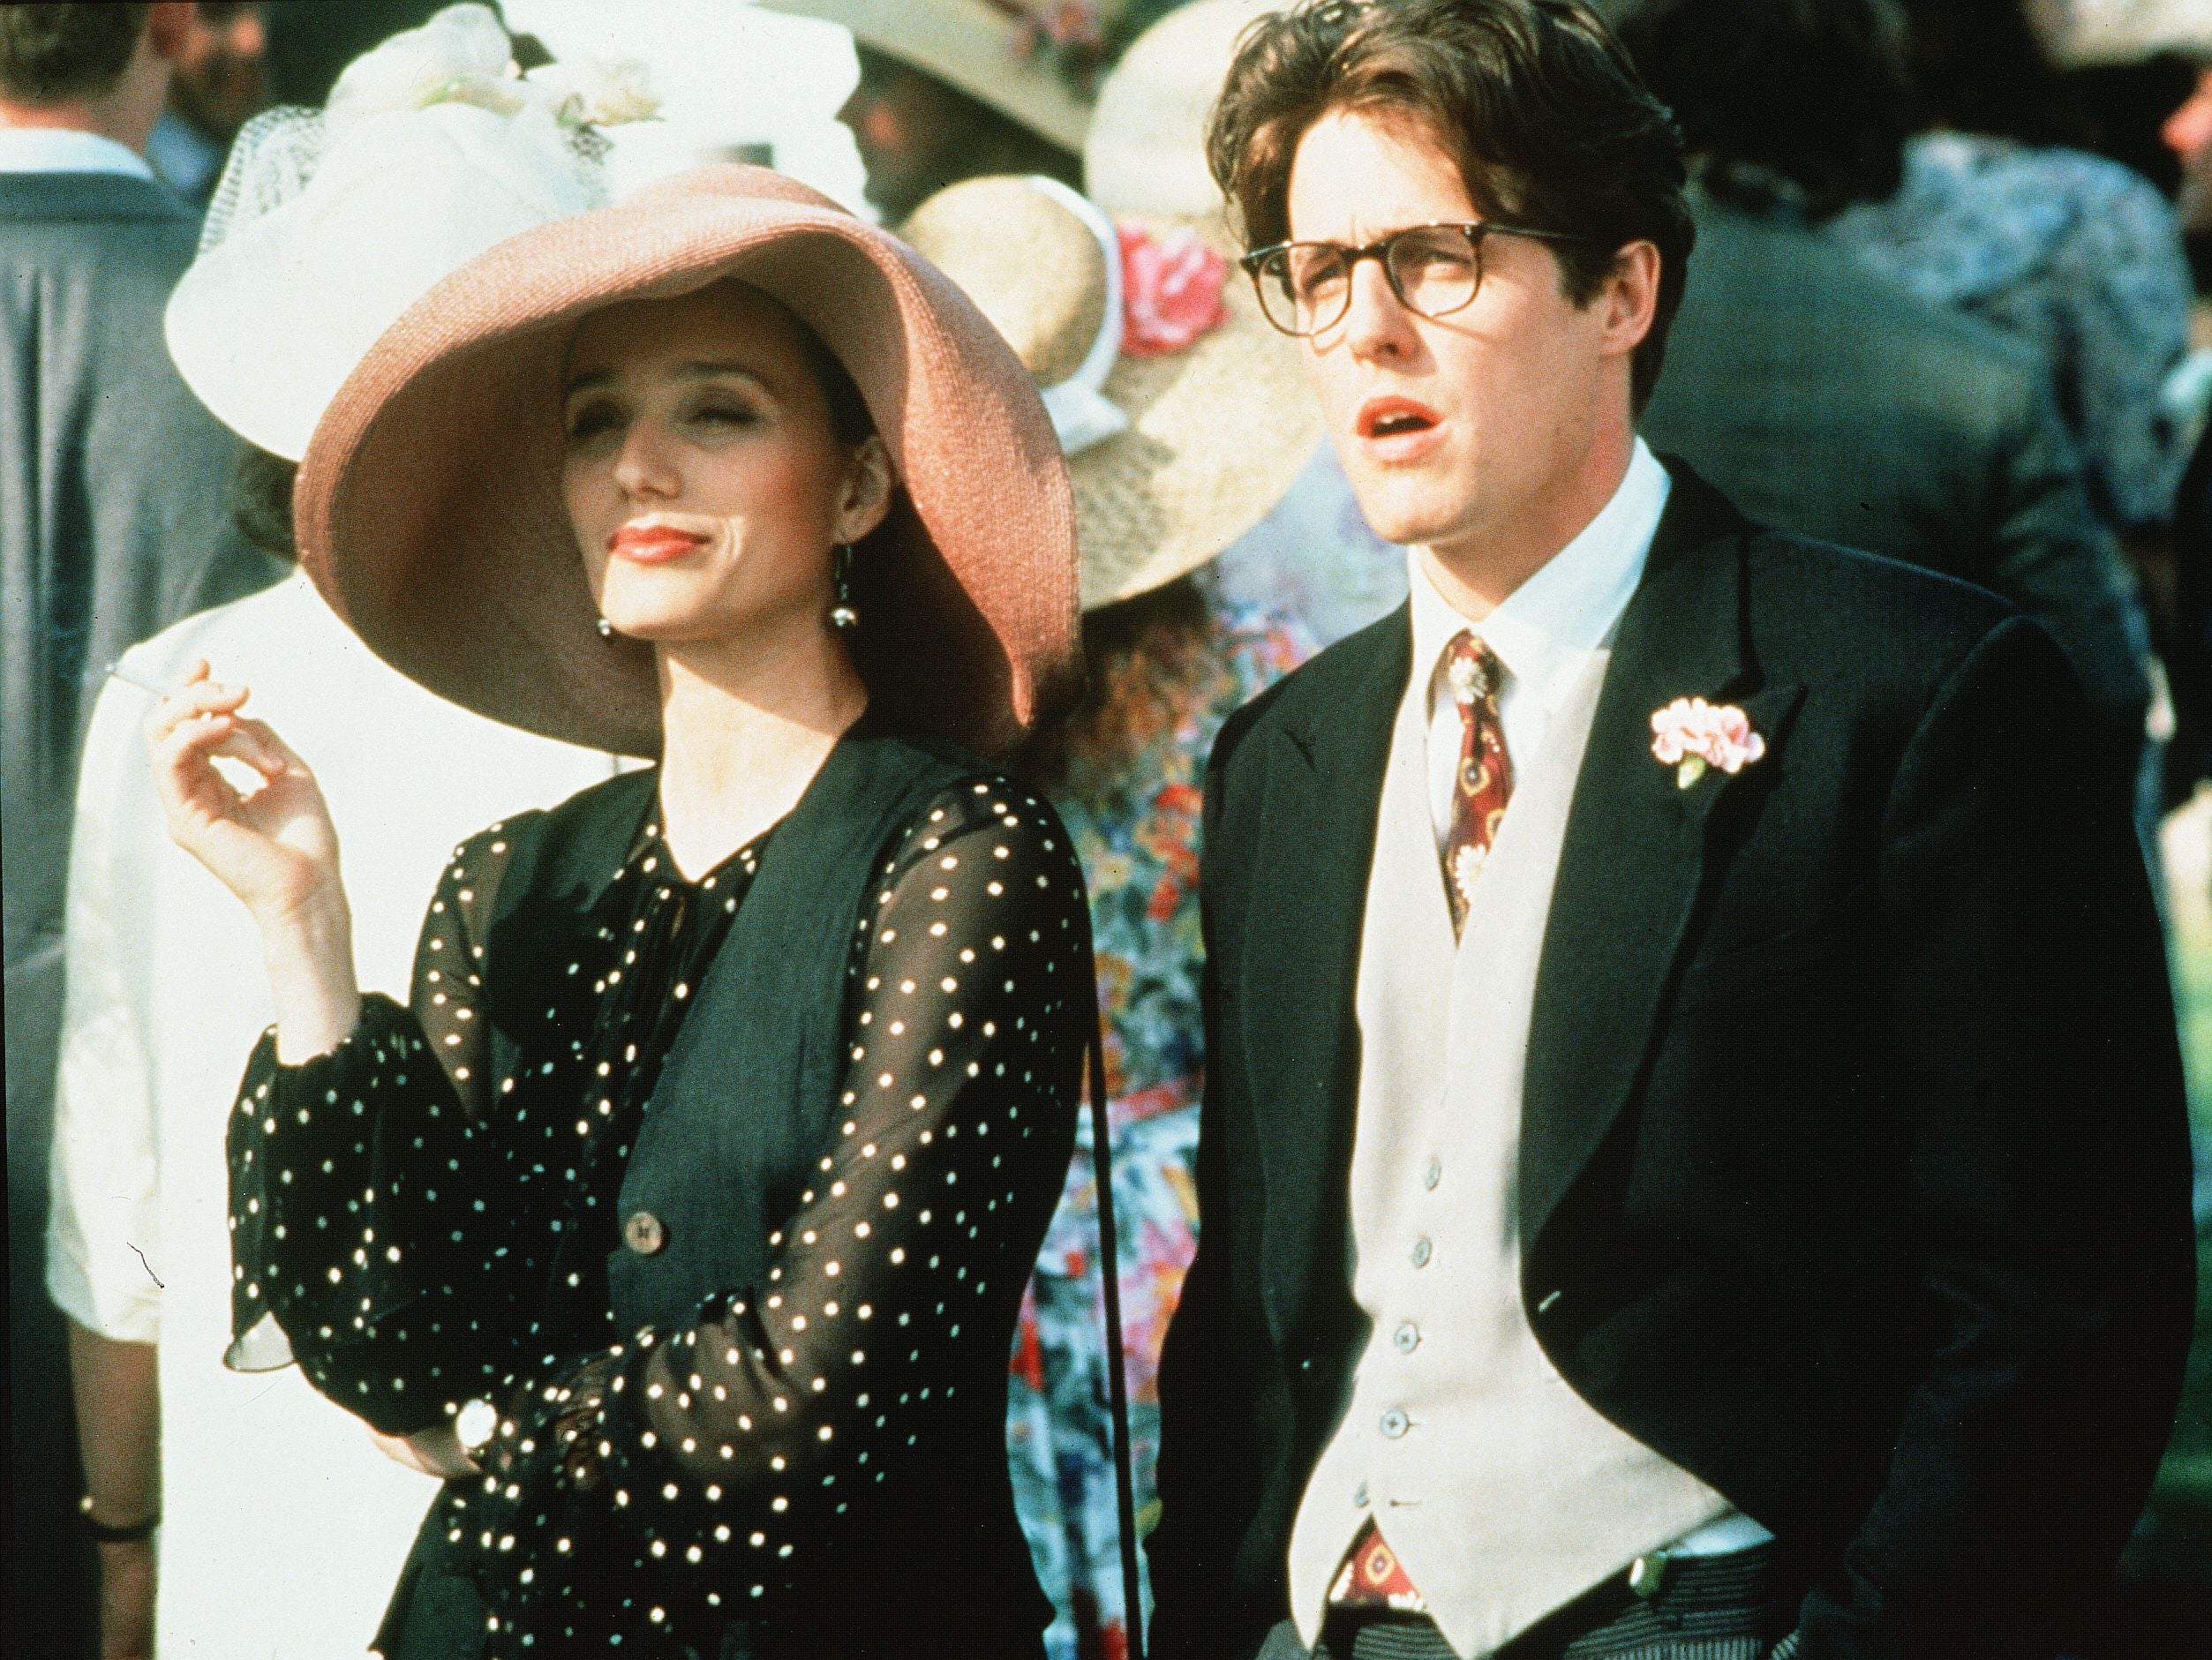 Kristin Scott Thomas and Hugh Grant in ‘Four Weddings and a Funeral’, an inspiration for Stourton and Palmer